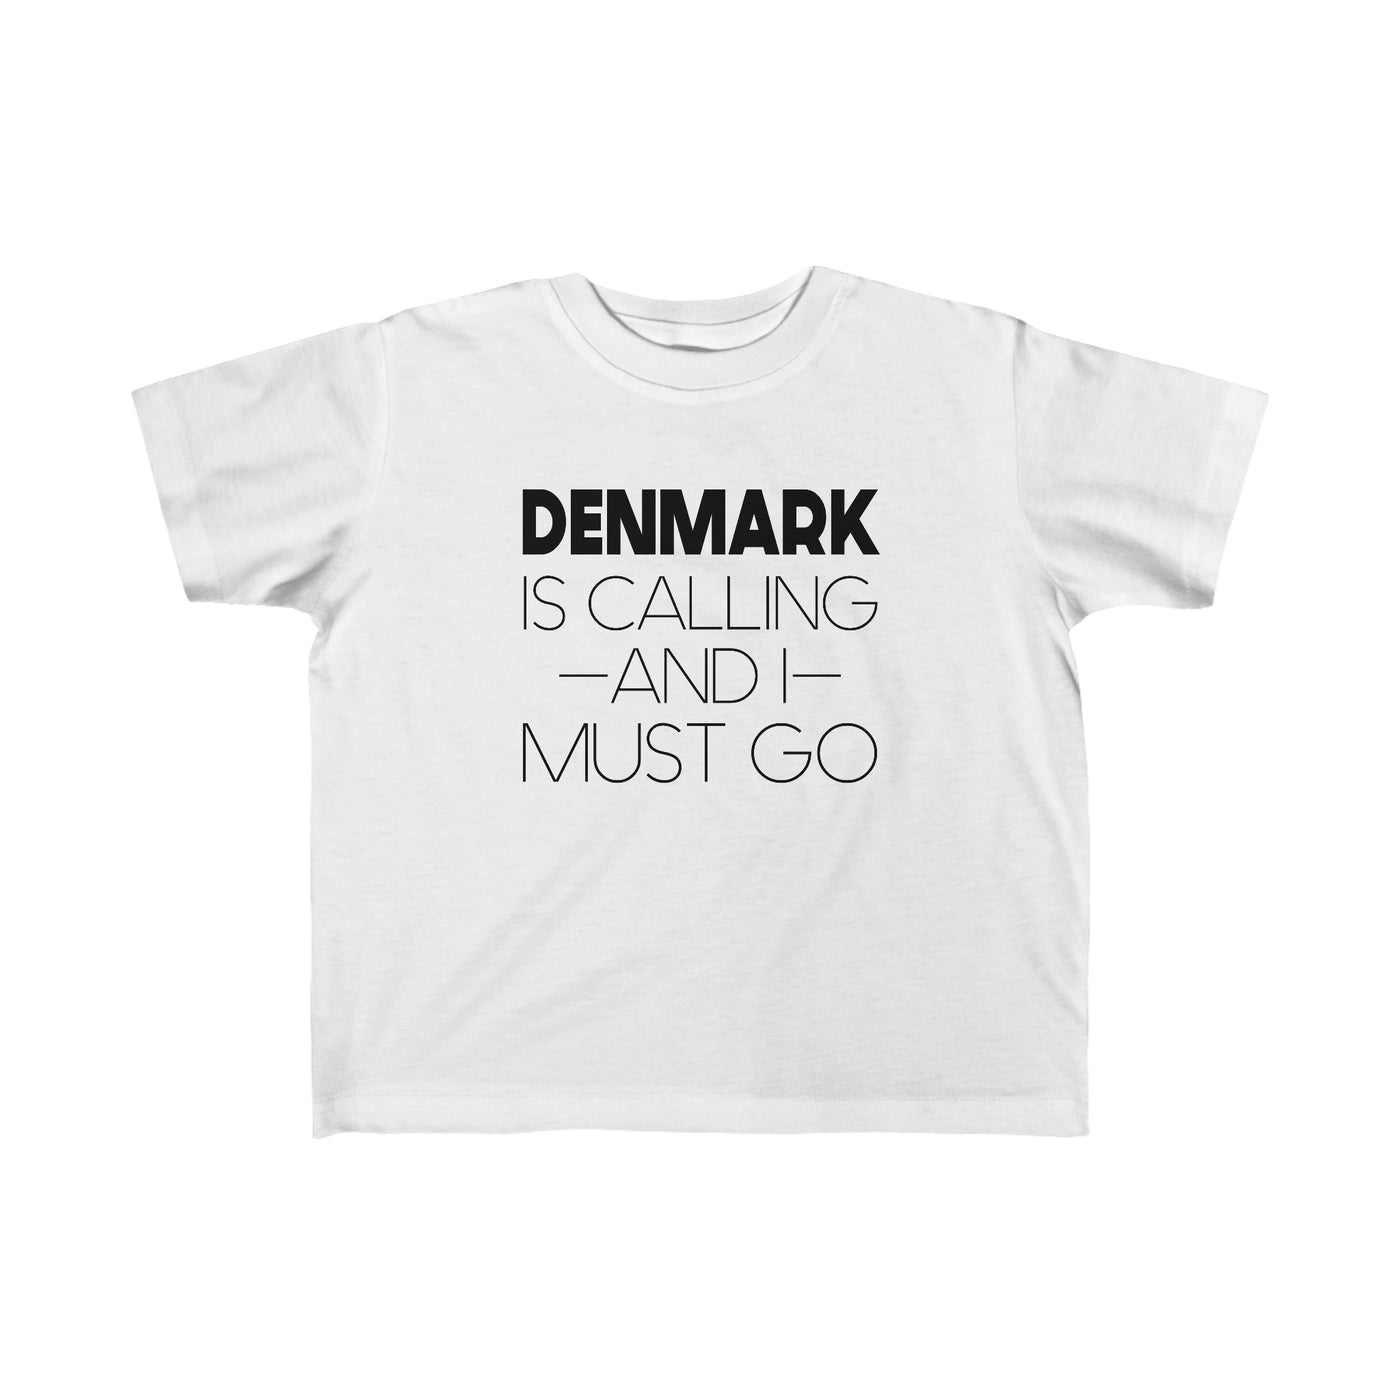 Denmark Is Calling And I Must Go Toddler Tee